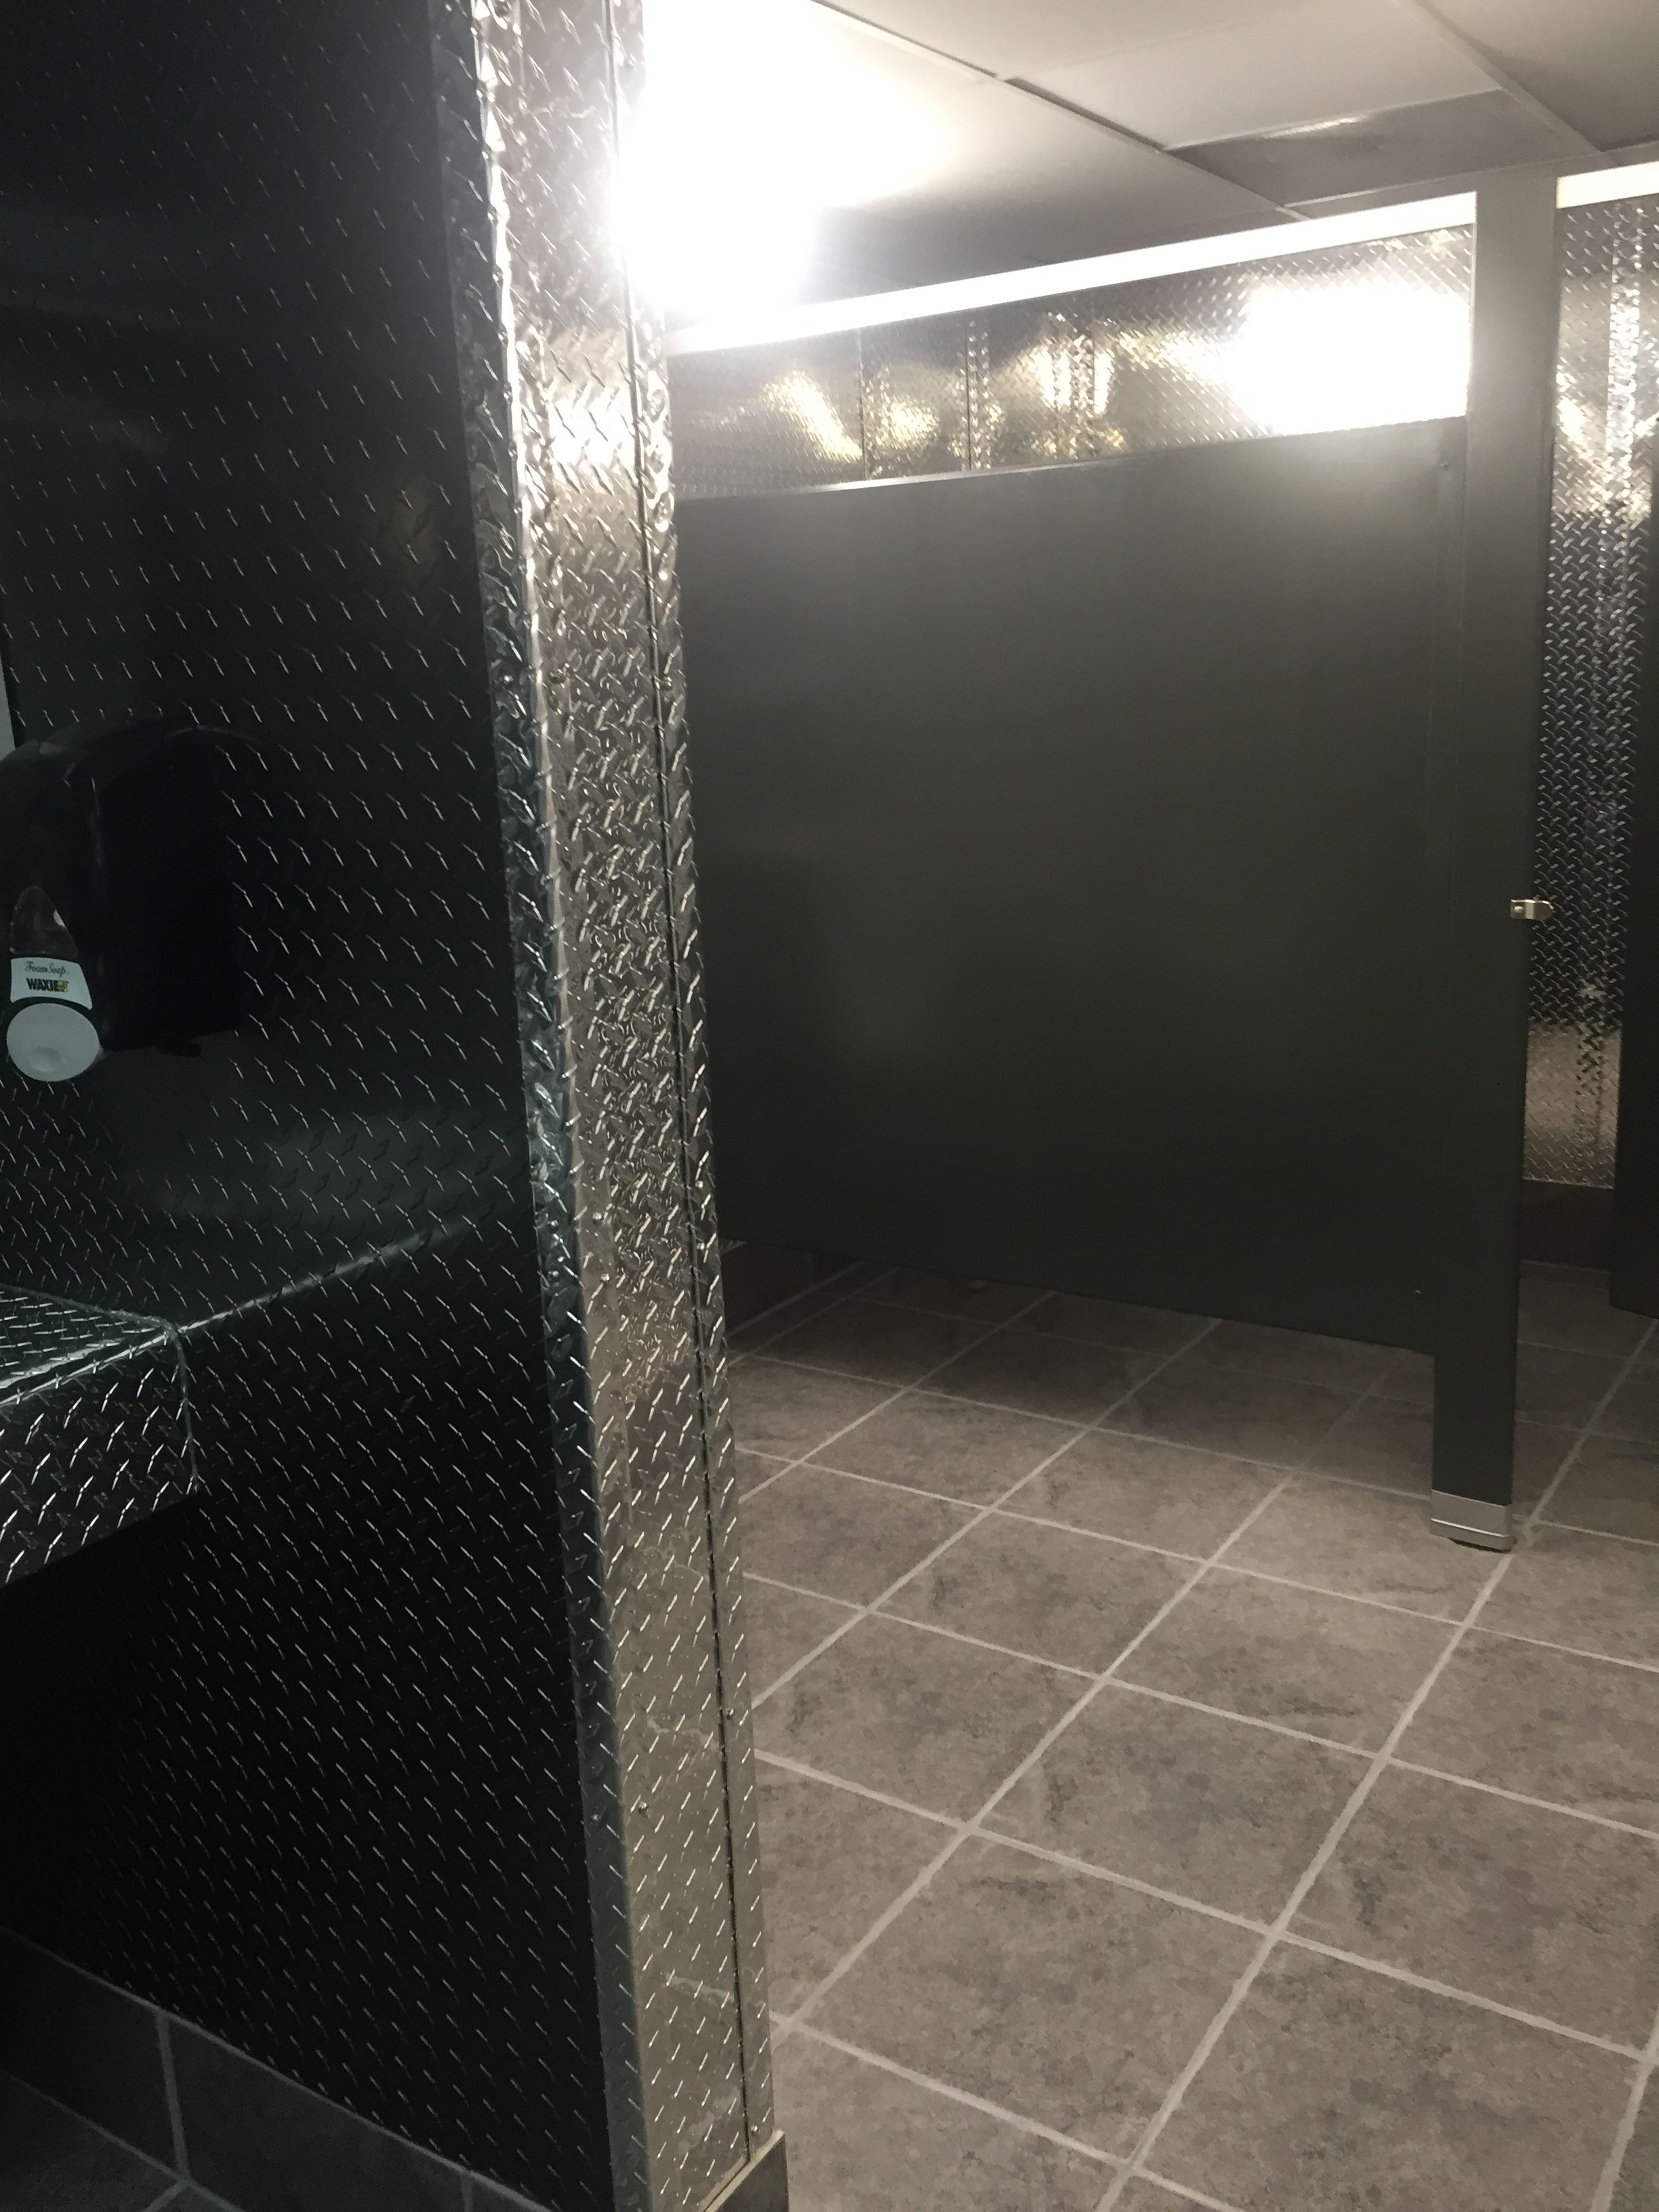 Remodel of bathroom using black and silver diamond plate from CutsMetal